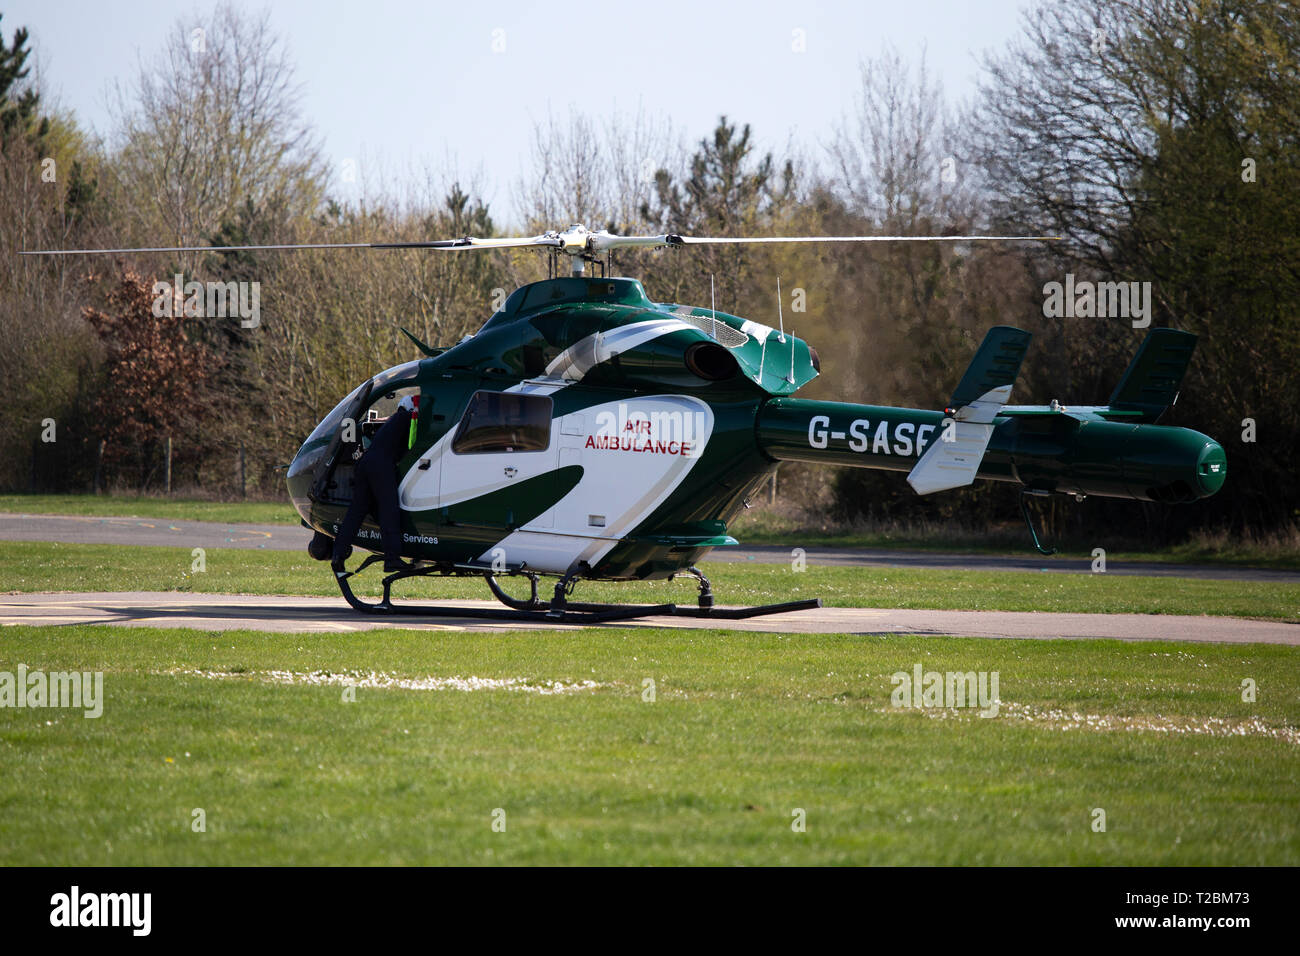 Helicopter Operating for Essex & Herts Air Ambulance Taking off from Earls Colne Aerodrome in Essex on a Fine Spring Day Stock Photo